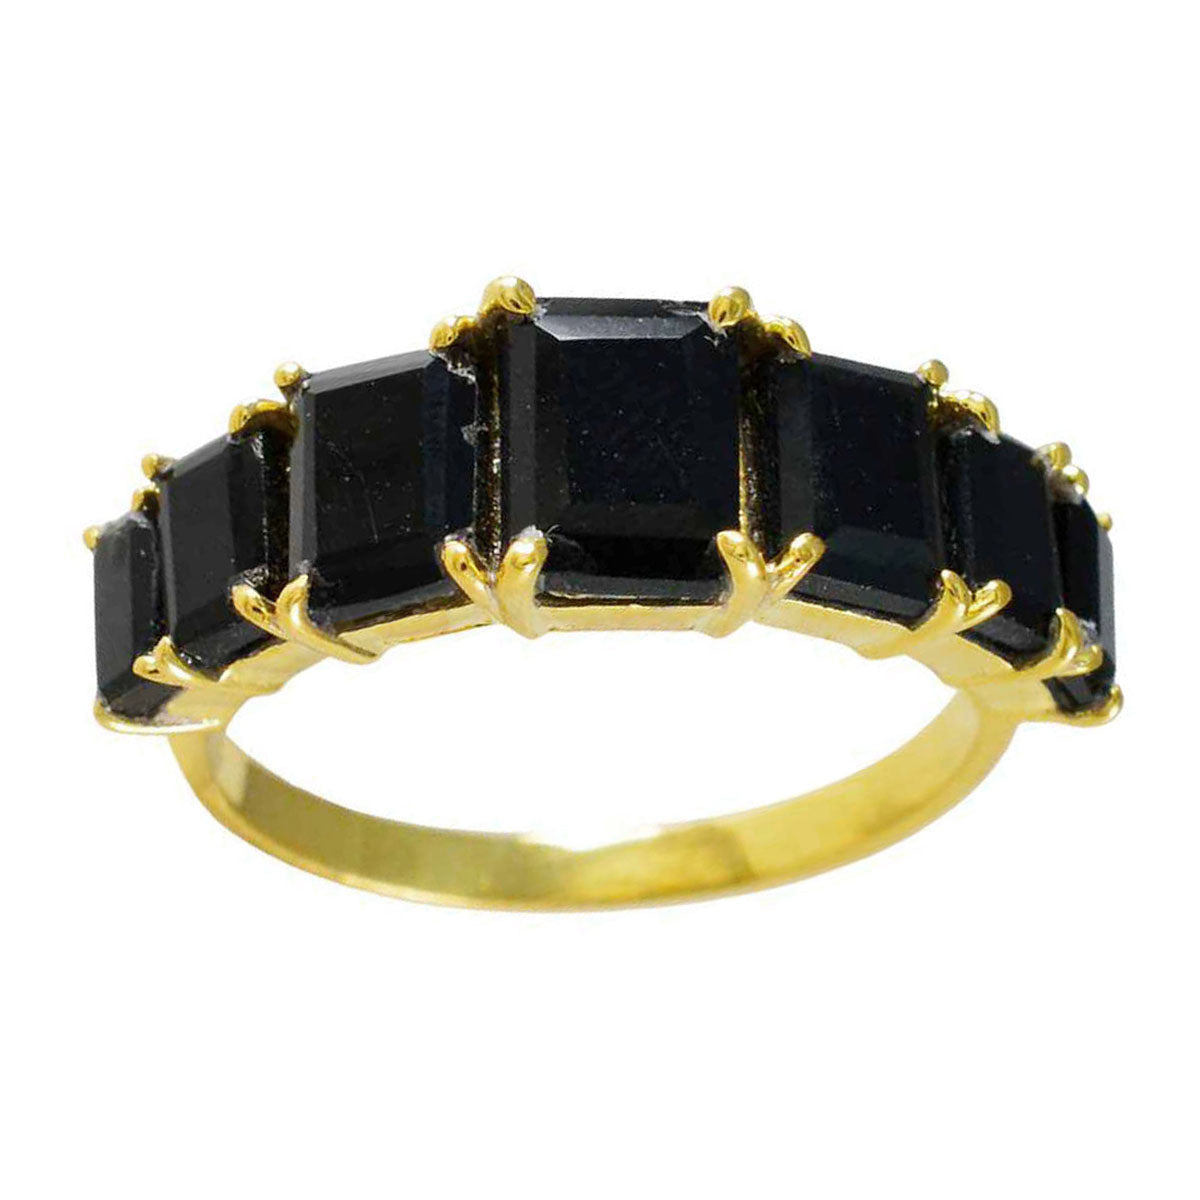 Riyo Exporter Silver Ring With Yellow Gold Plating Black Onyx Stone Octagon Shape Prong Setting Fashion Jewelry Black Friday Ring